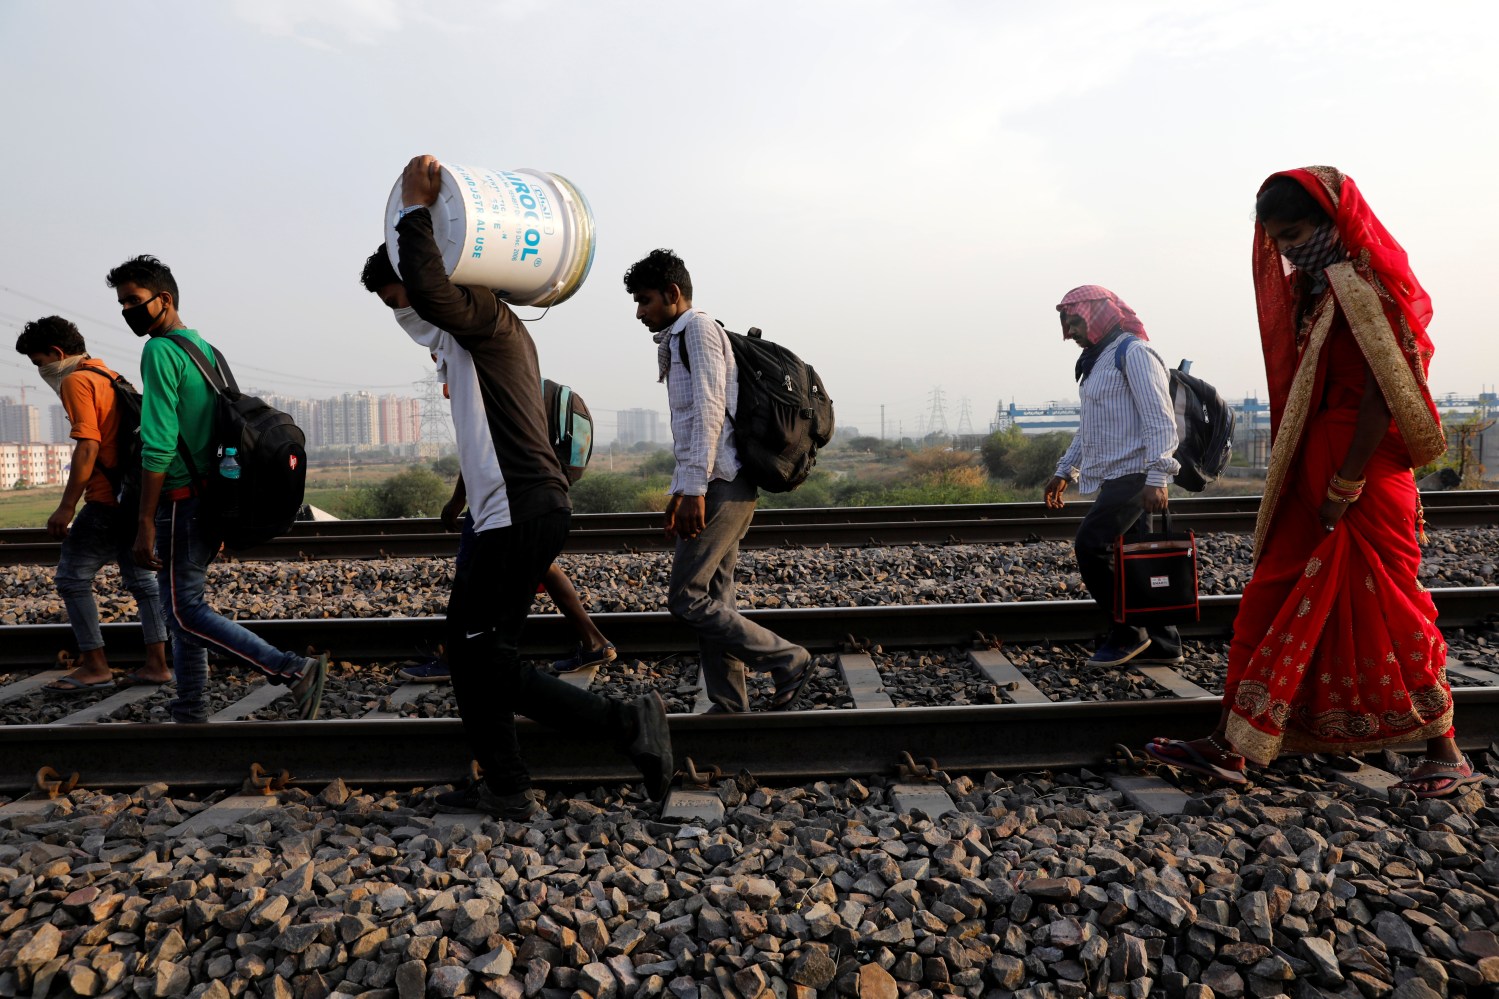 Migrant workers with their faces covered and carrying their belongings, walk along a railway track to return to their home state of eastern Bihar, during an extended nationwide lockdown to slow the spread of the coronavirus disease (COVID-19), in Ghaziabad, in the outskirts of New Delhi, India, May 13, 2020. REUTERS/Adnan Abidi